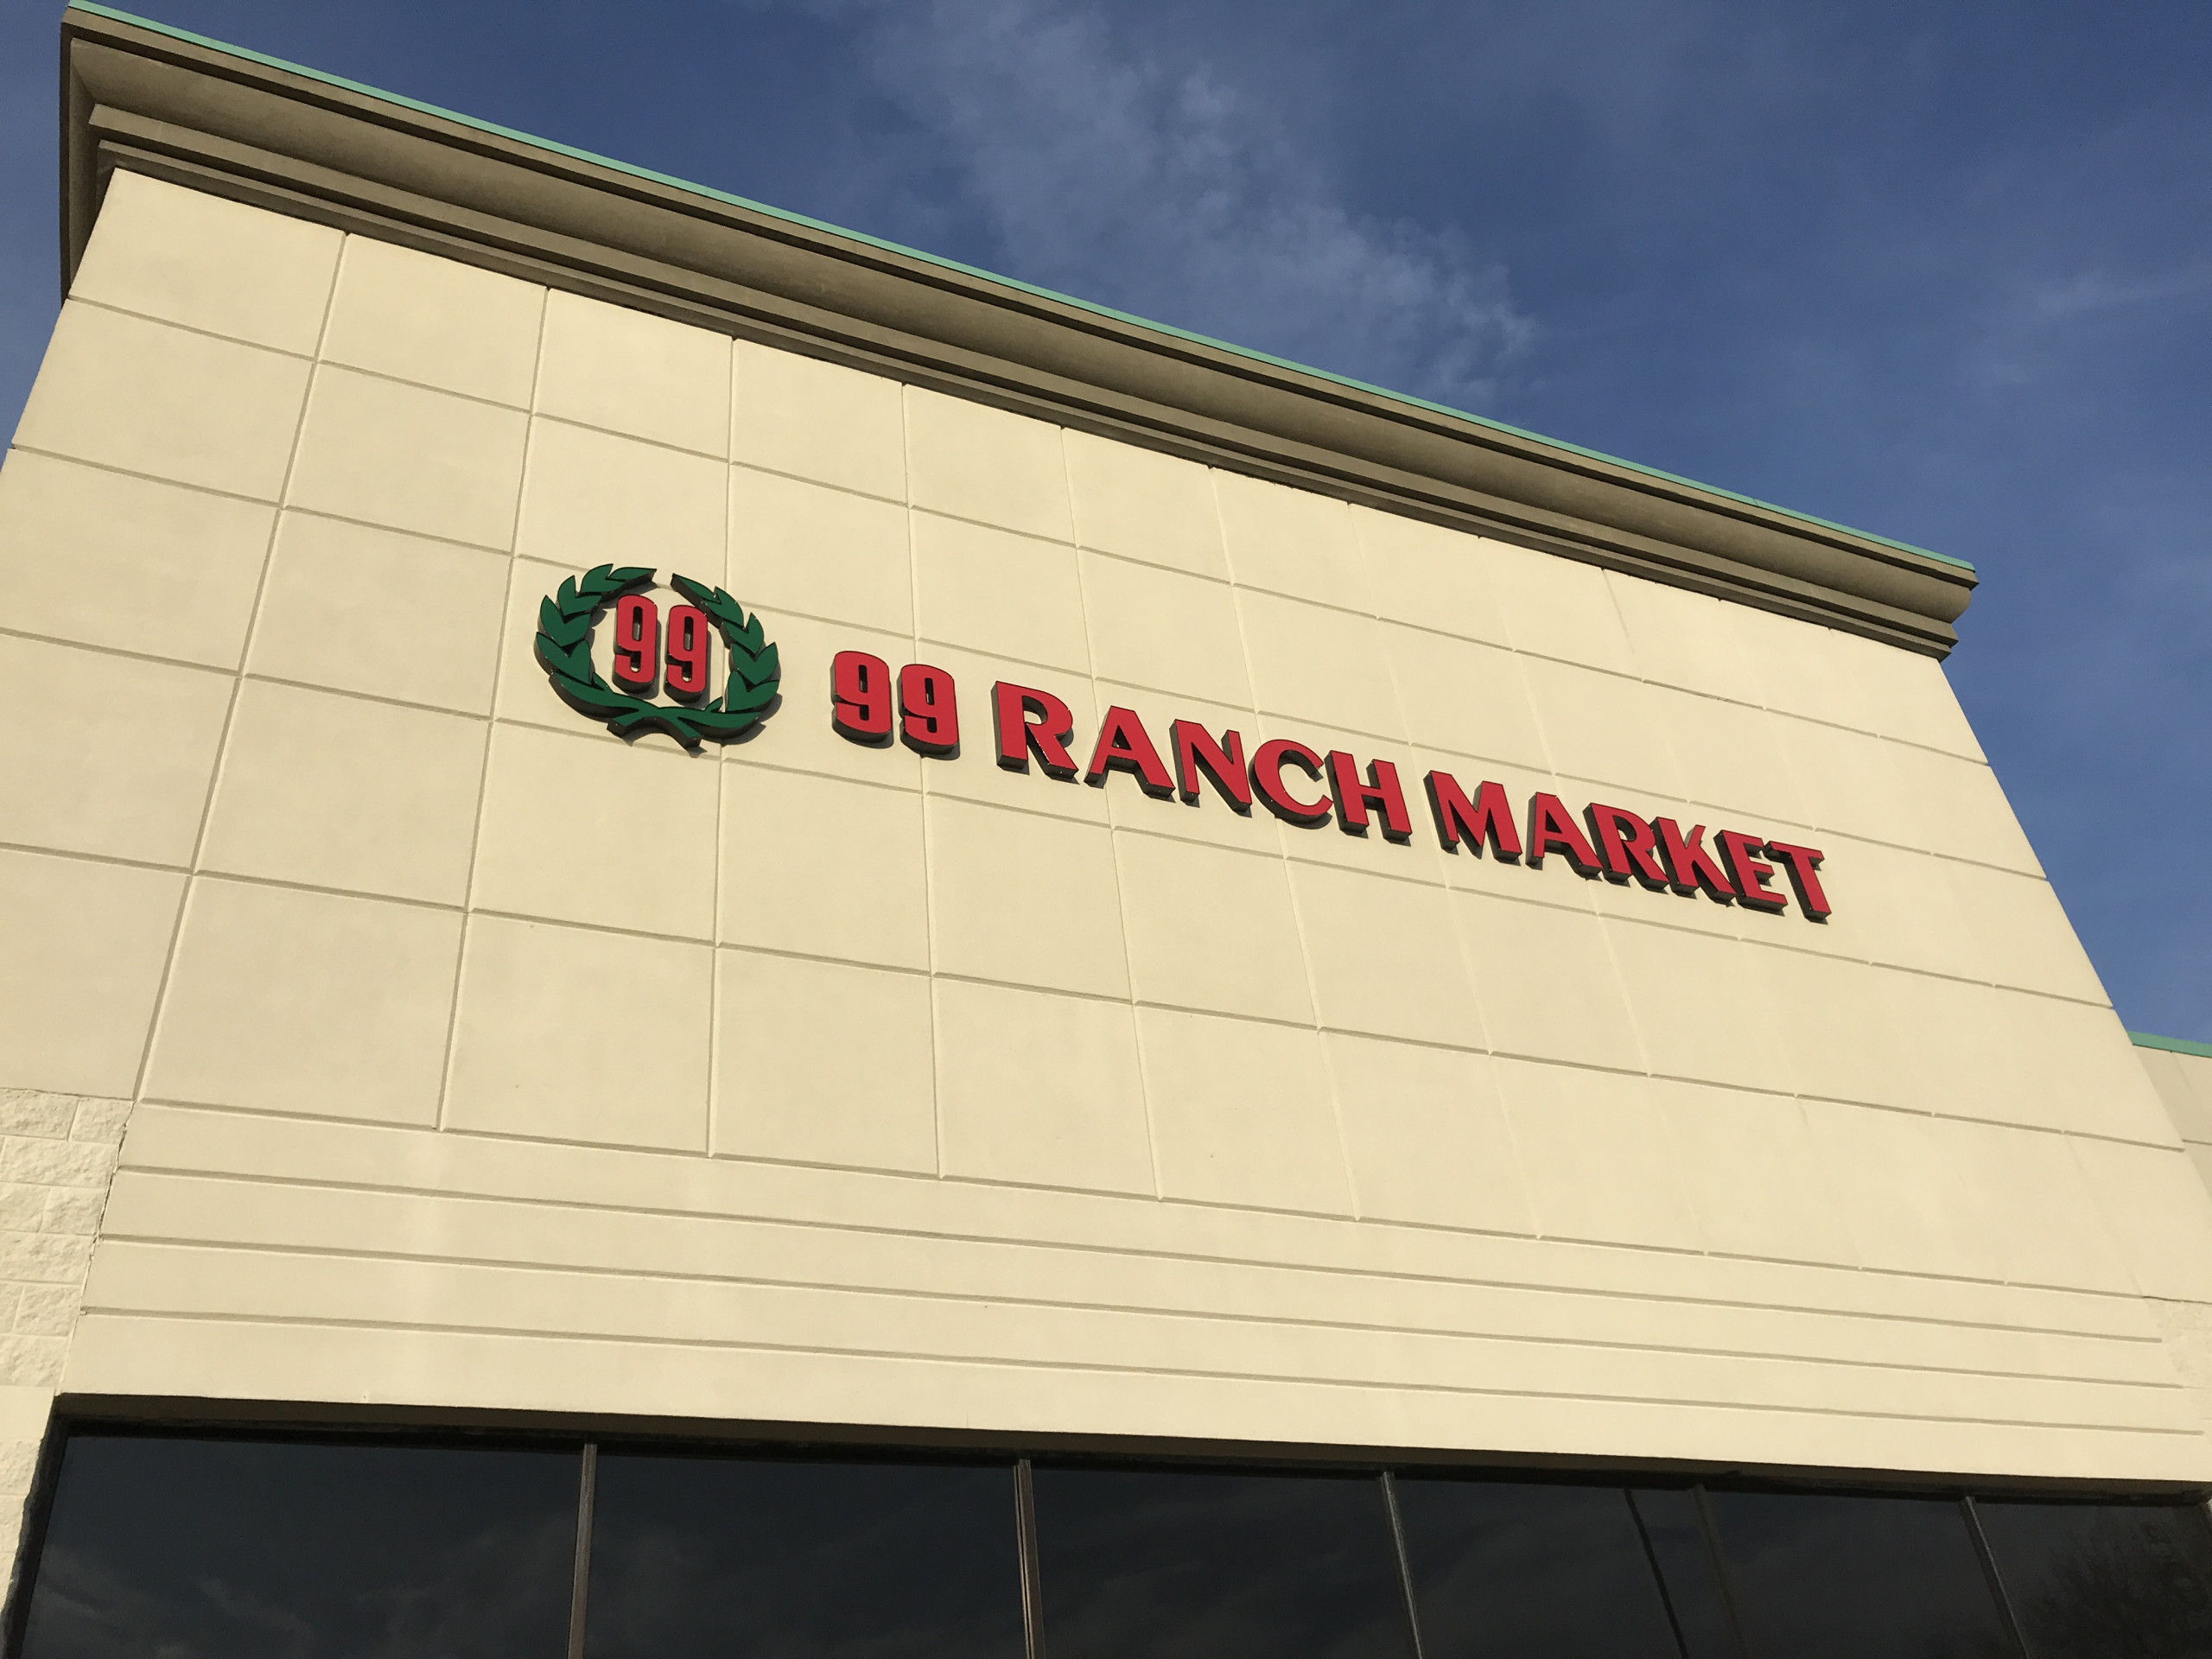 99 Ranch Coming In 2018 To Hackensack Boozy Burbs